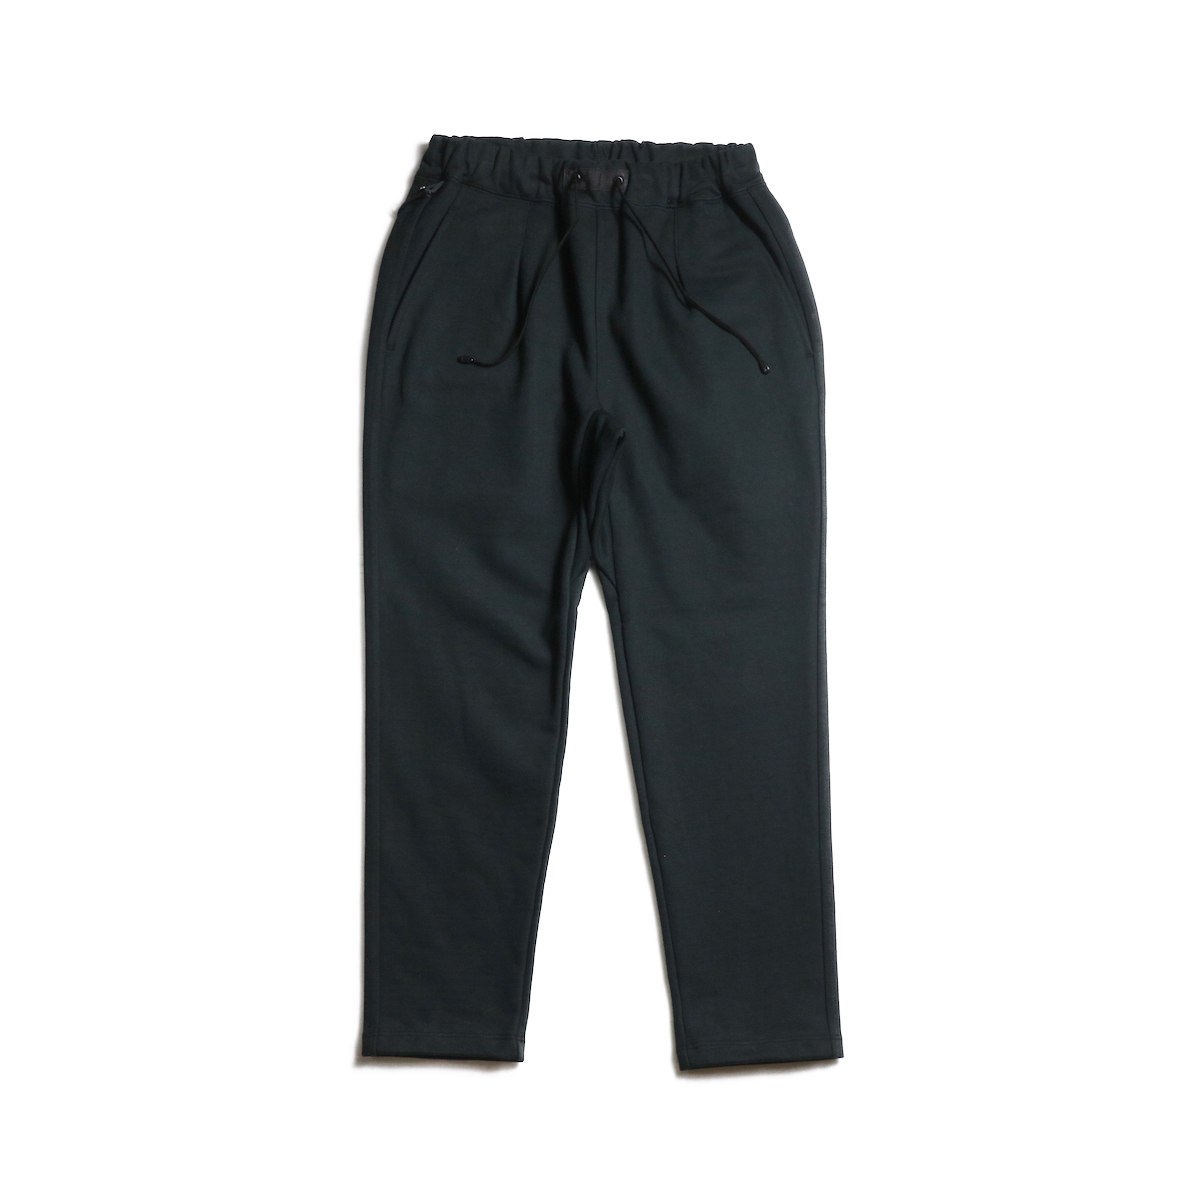 CURLY / BROMLEY EZ TROUSERS (Black)